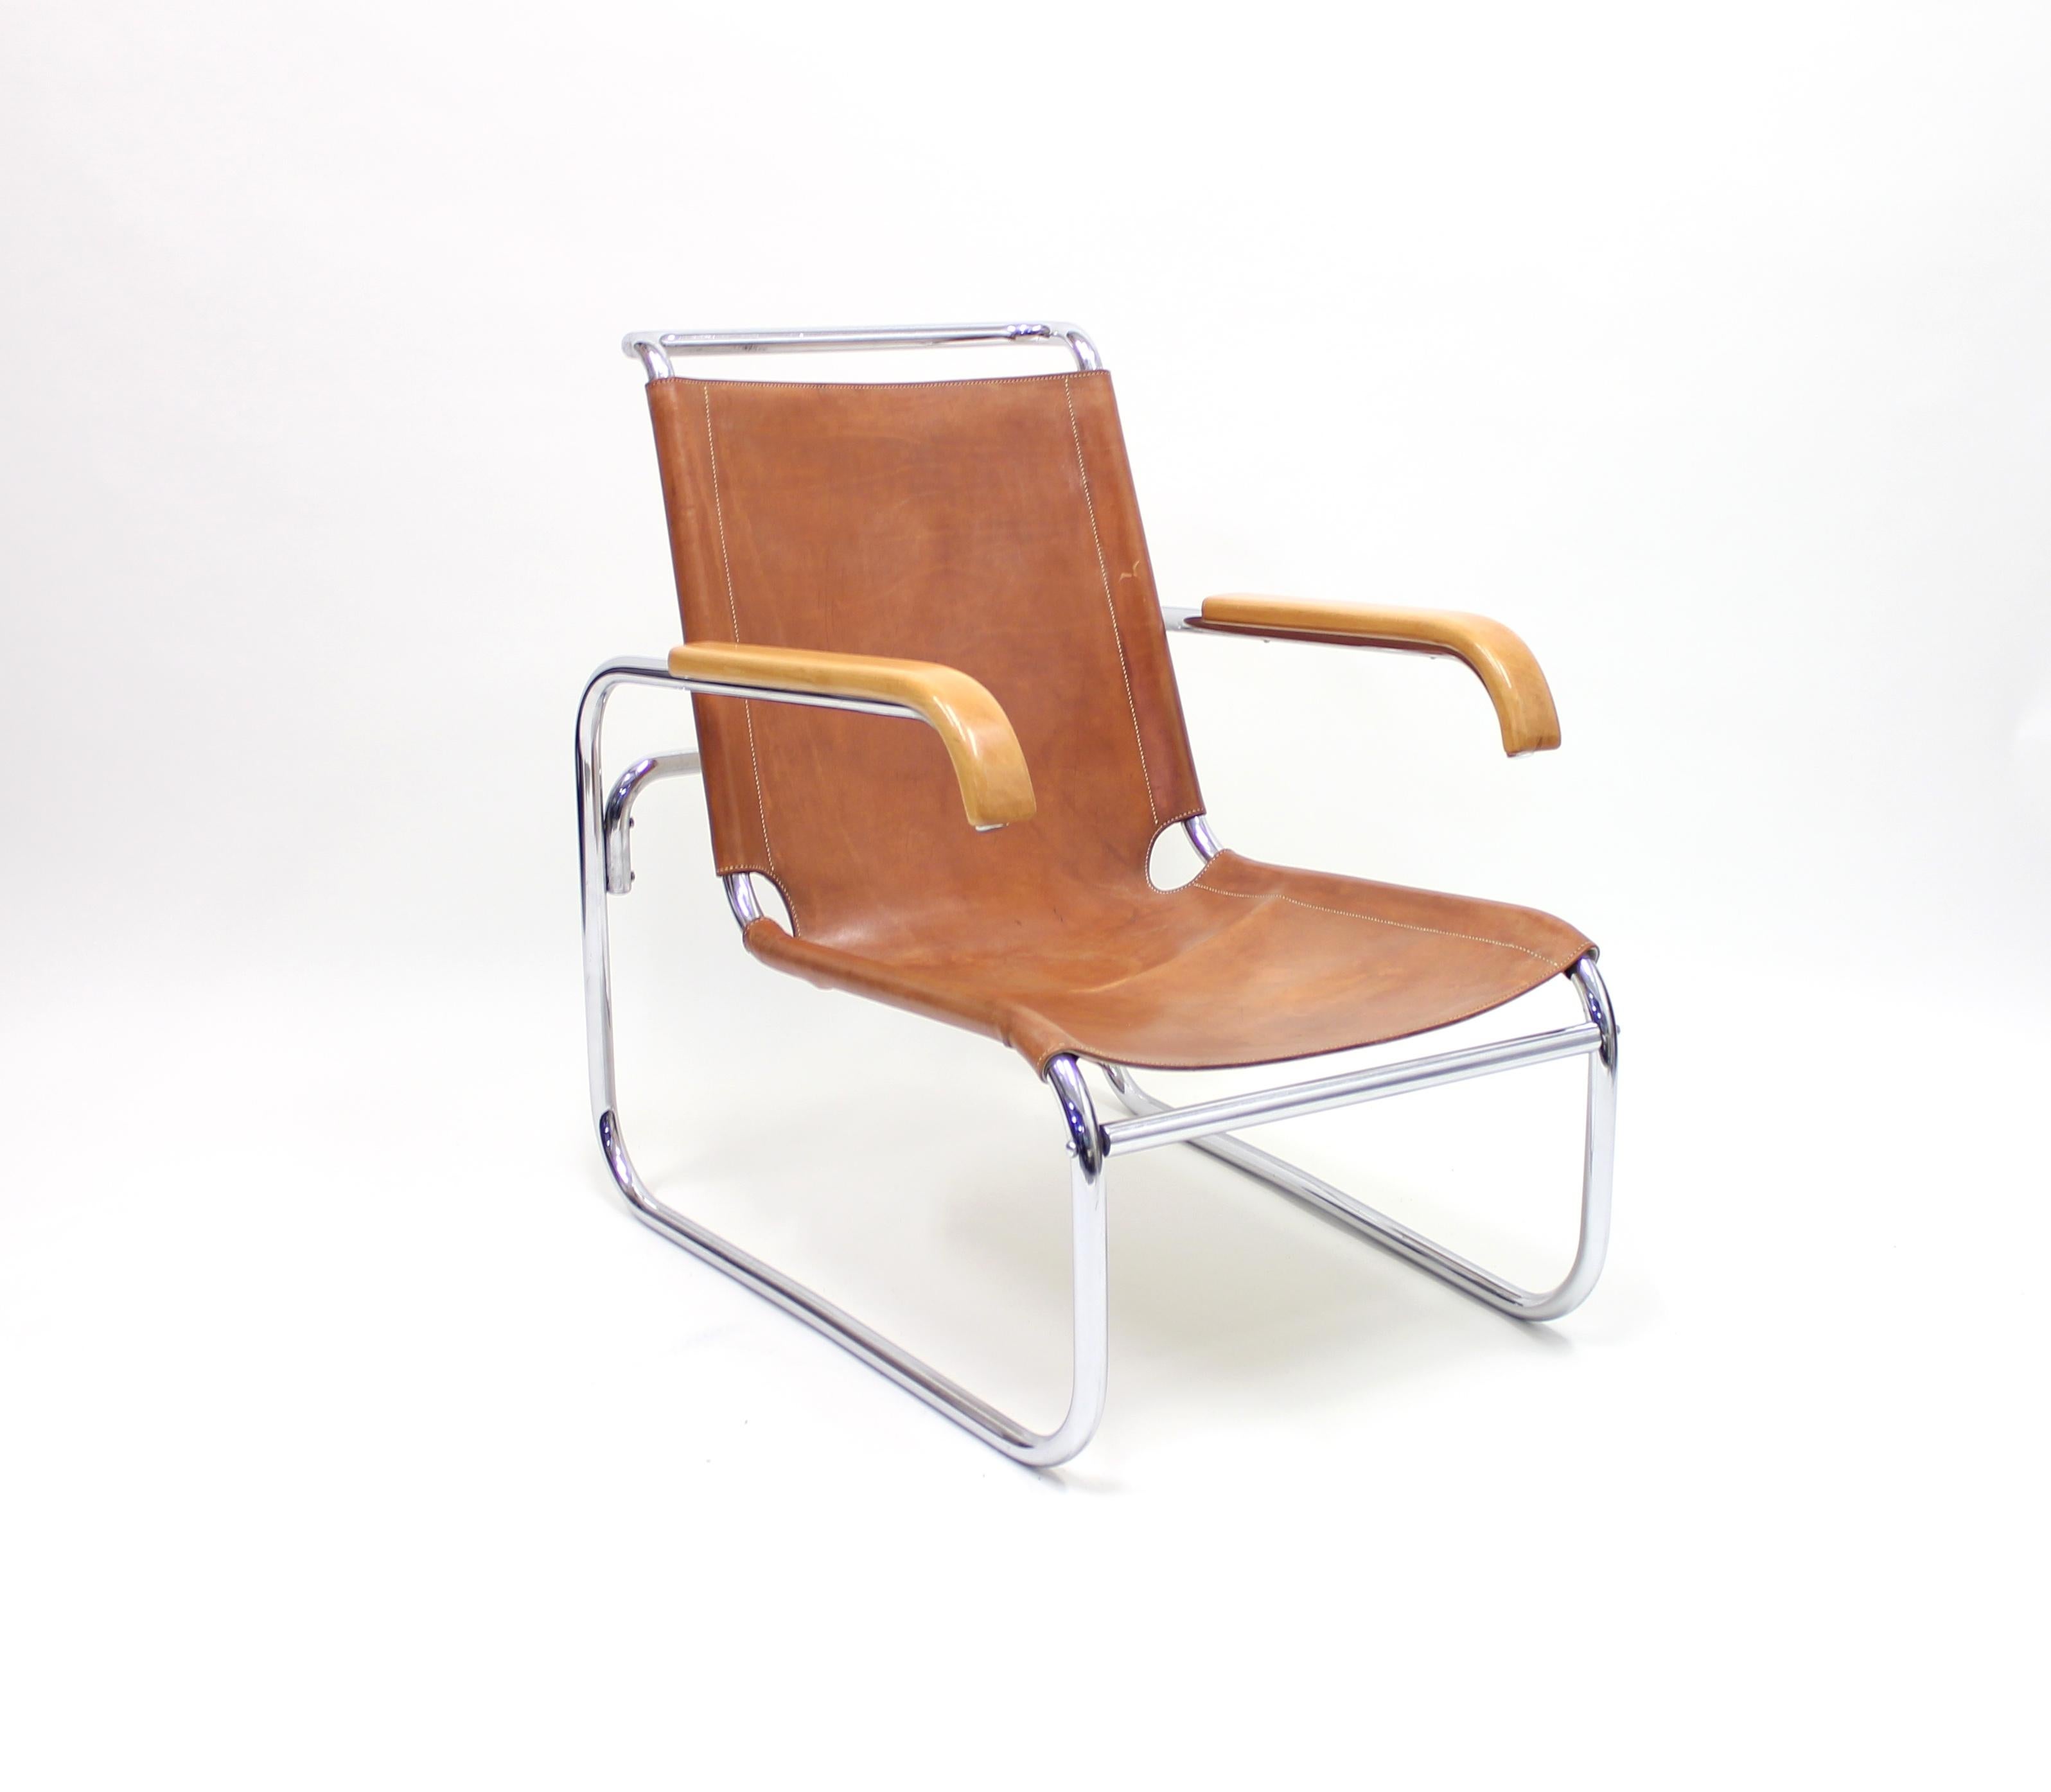 Very early example from the 1930s of the classical B35 model designed by Marcel Breuer for Thonet in the very last years of the 1920s. The leather has great patina and is definitely early but possibly a later addition and has been stabilized at some